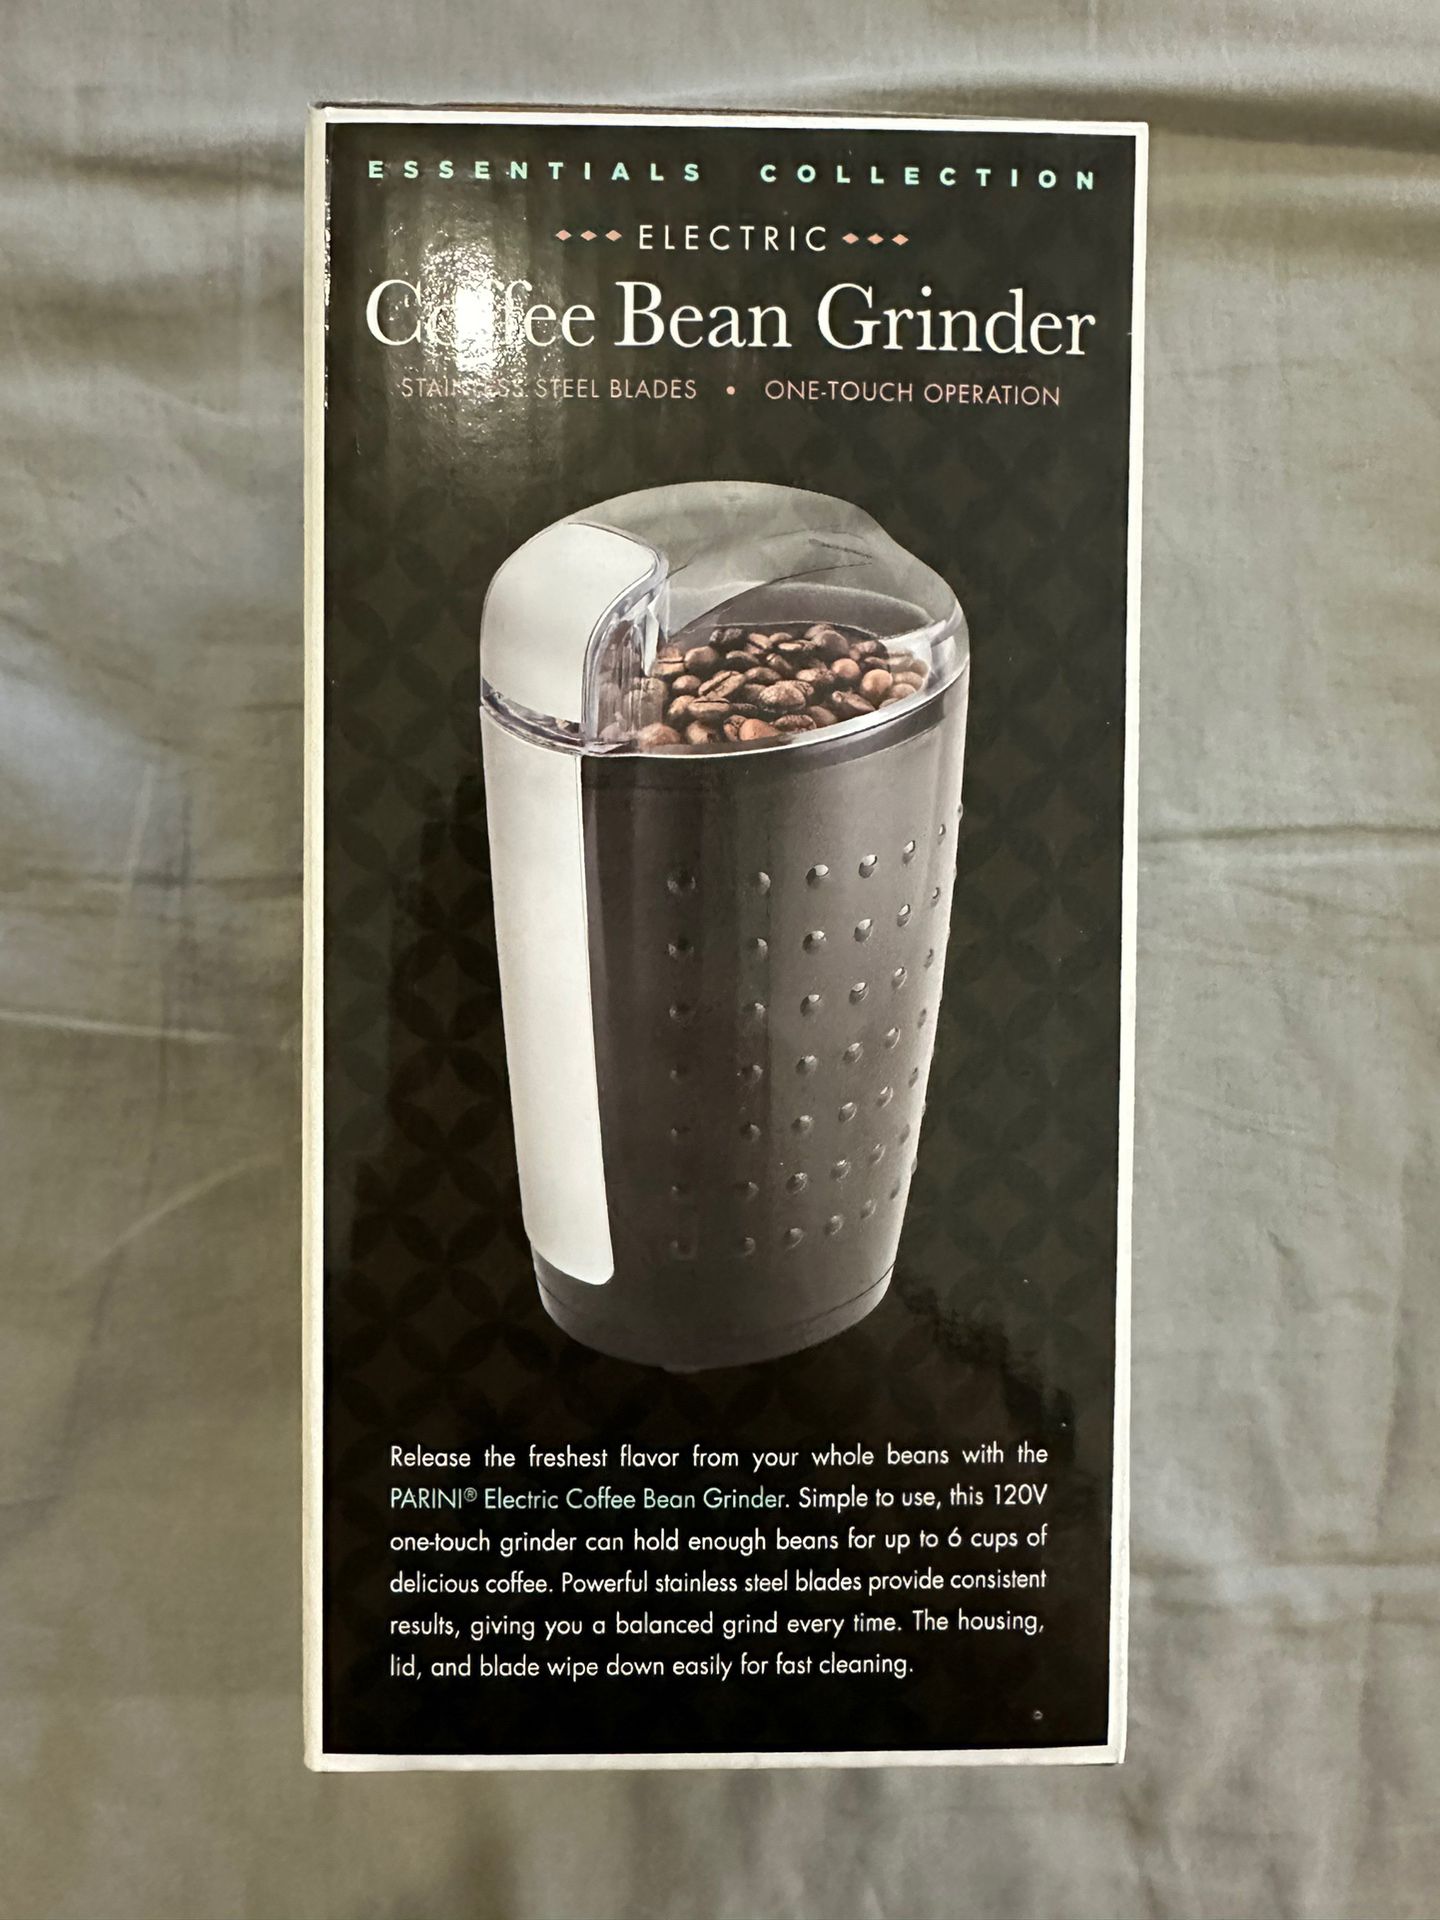 Mr Coffee Coffee Grinder BRAND NEW for Sale in Bronxville, NY - OfferUp